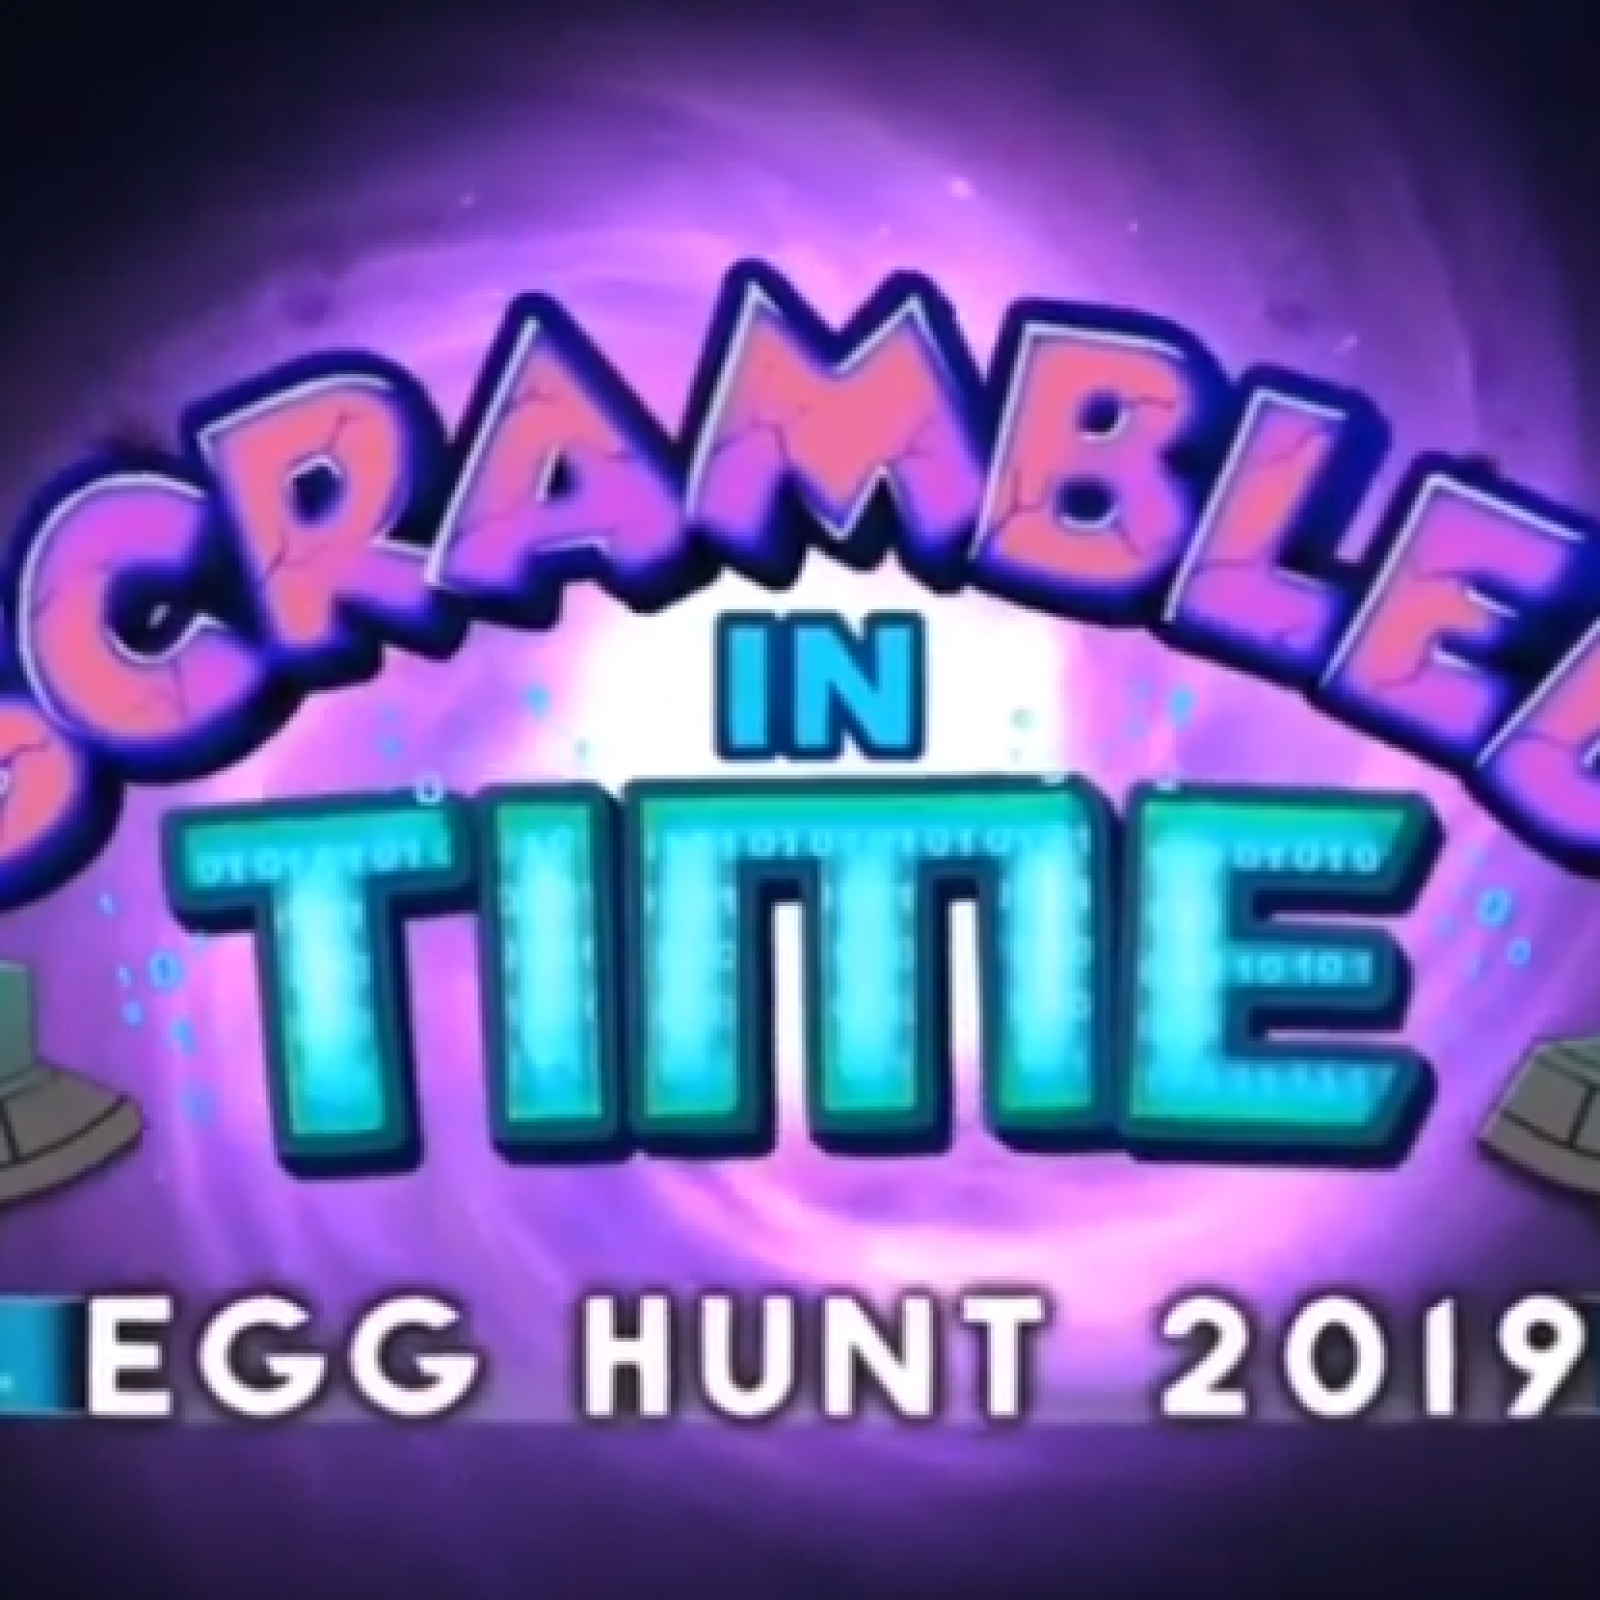 Roblox Egg Hunt 2019 Leaked Eggs Badges Start Time And More - roblox egg hunt 2019 leaked eggs badges start time and more